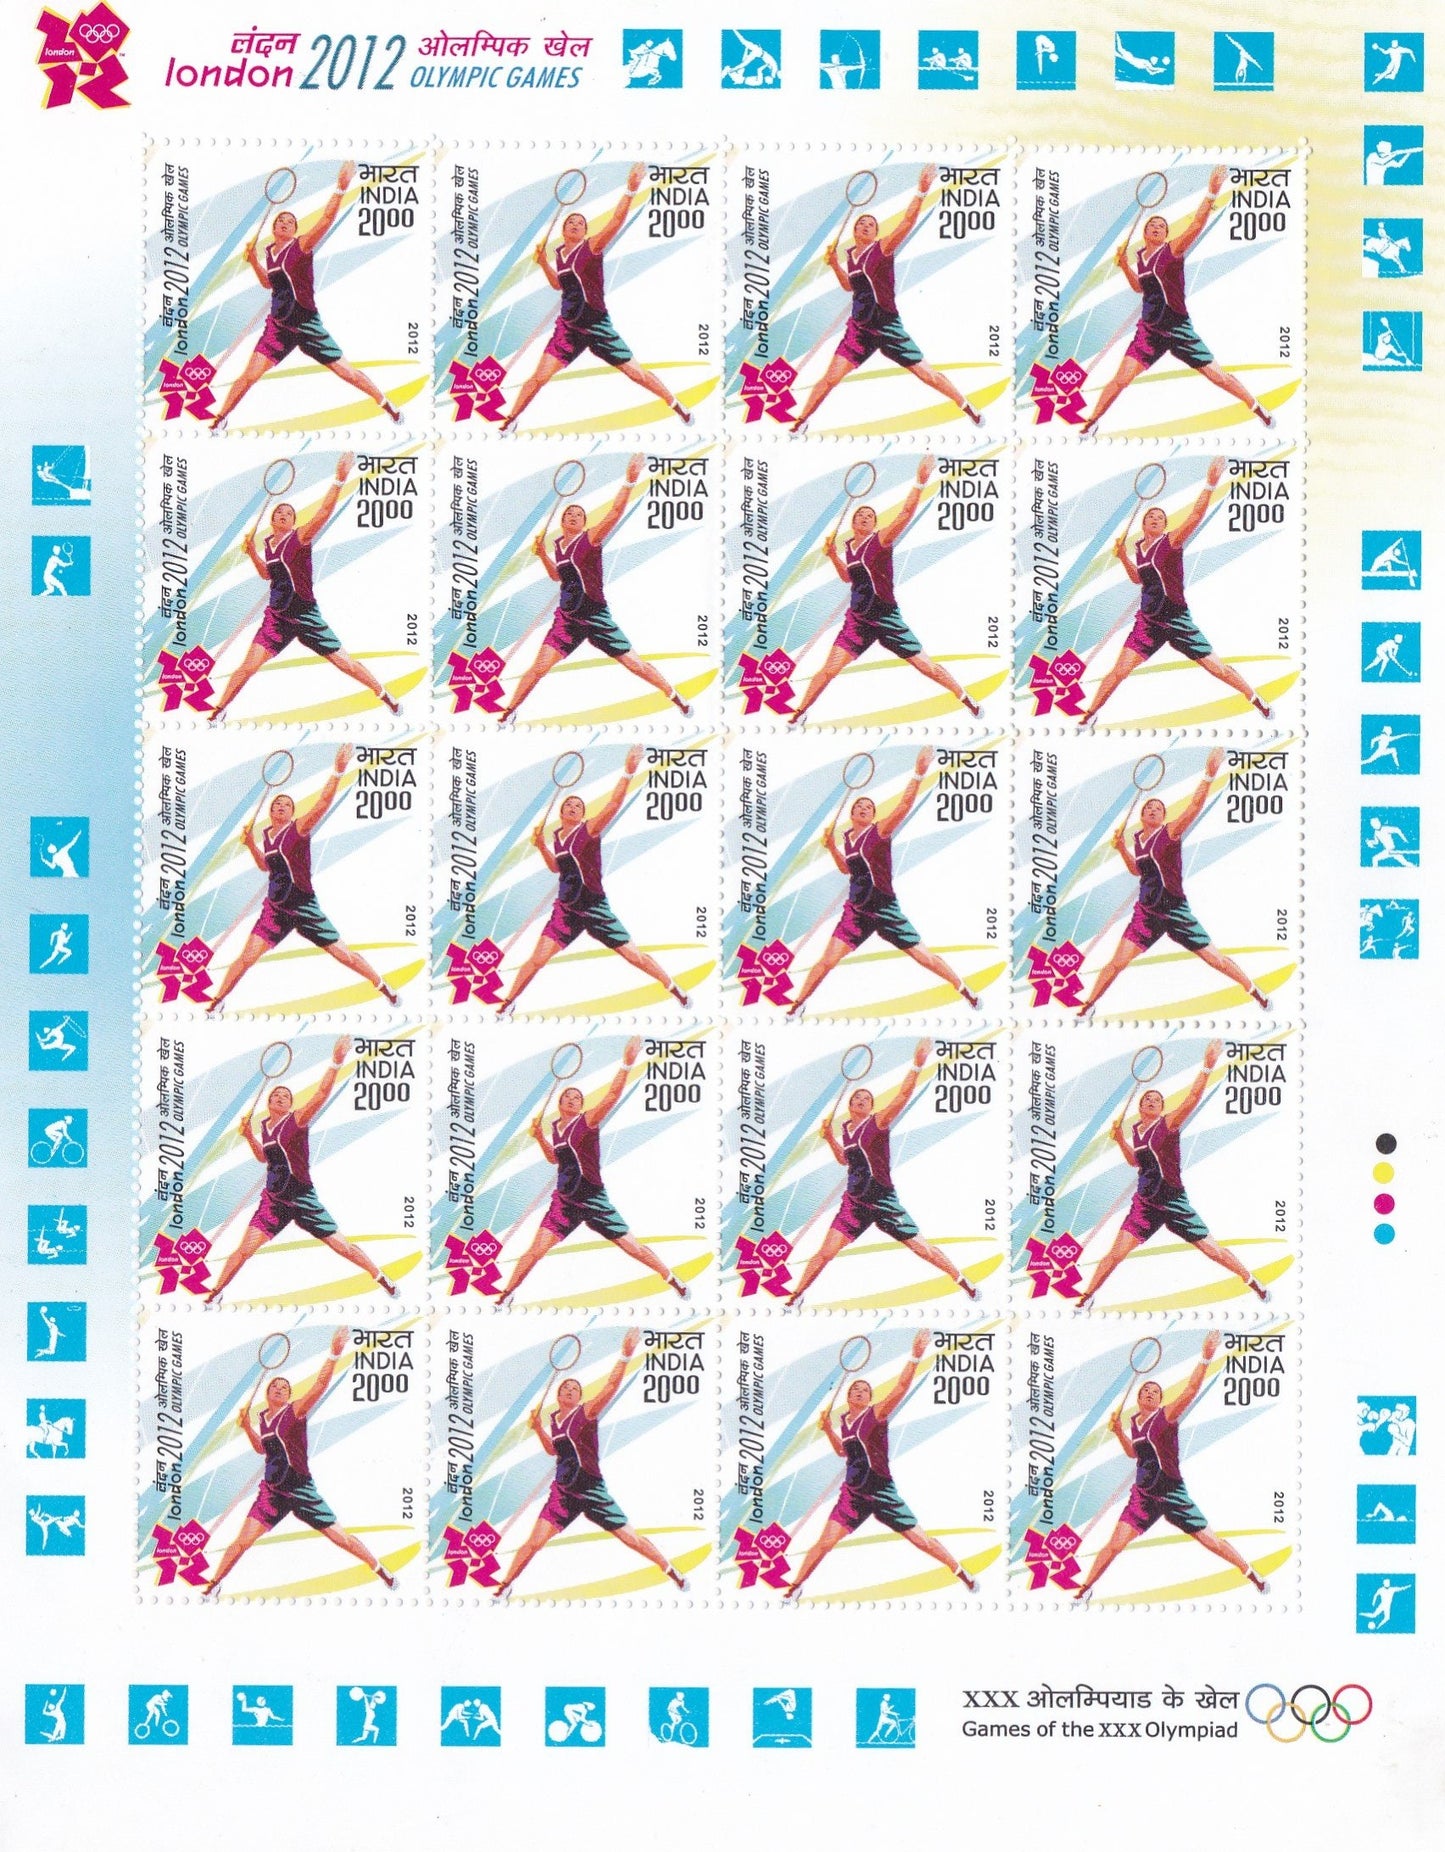 India-2012 Complete set of 5 Sheetlet Olympics